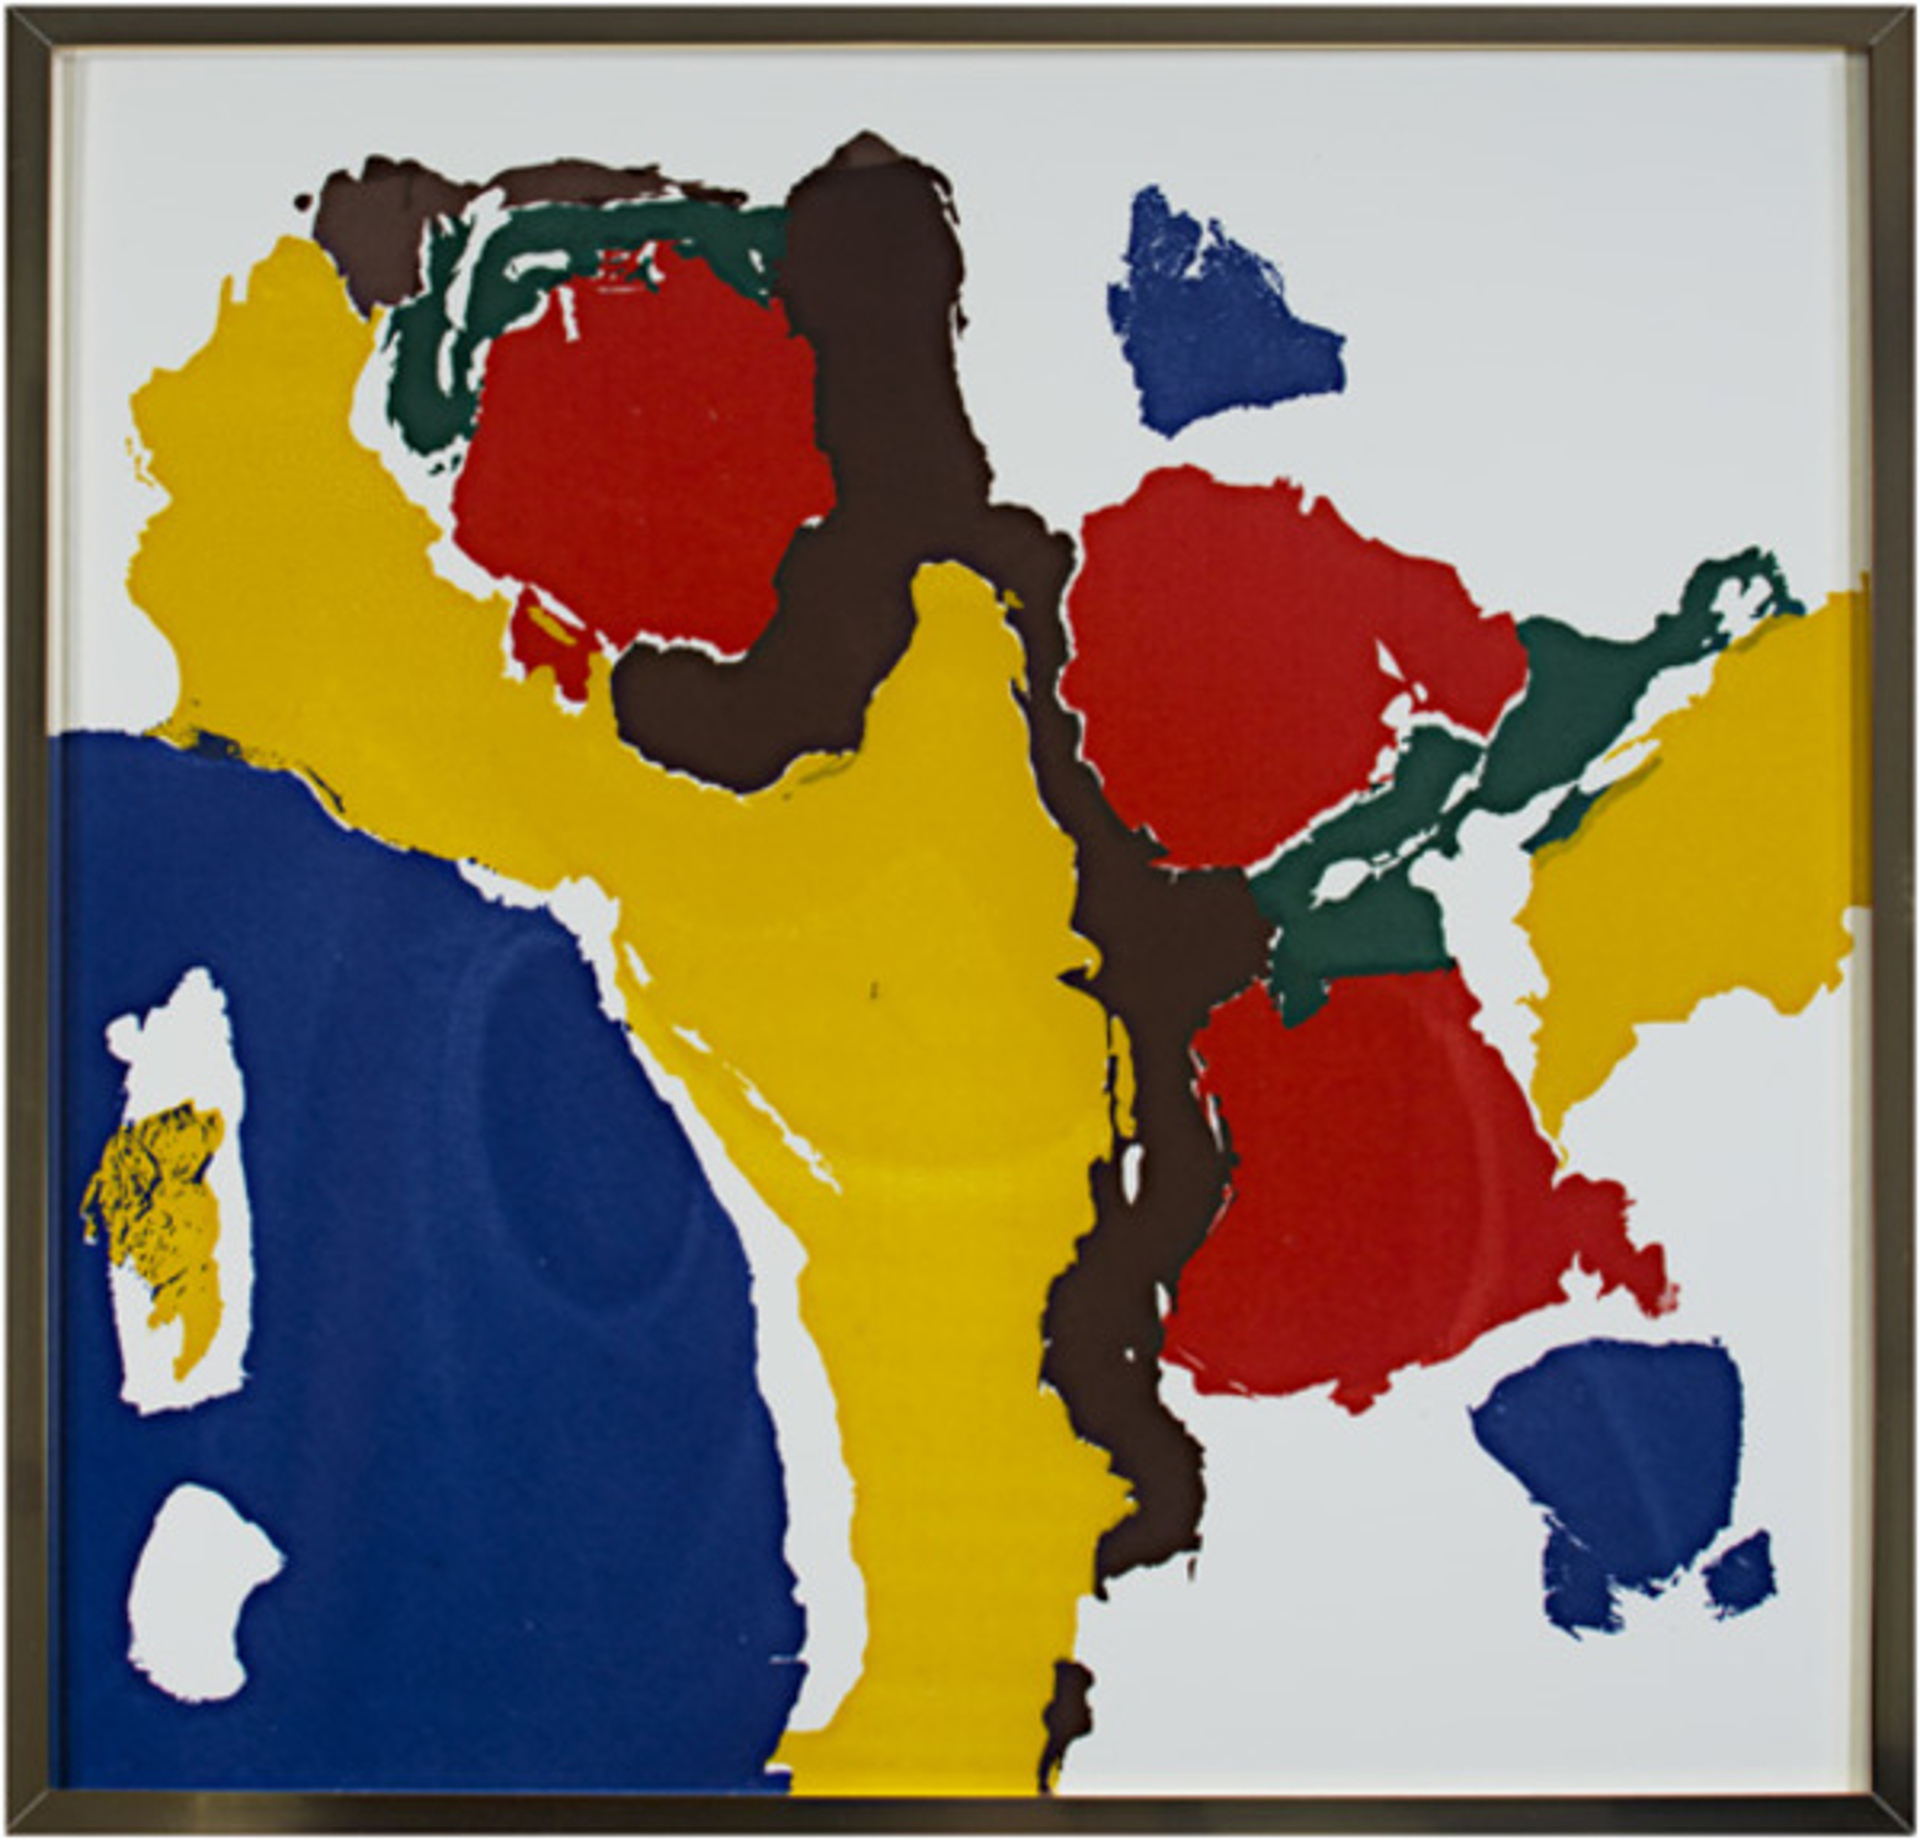 Untitled-Abstract (Blue, Yellow, Red, Brown & Green) by Helen Frankenthaler (after)